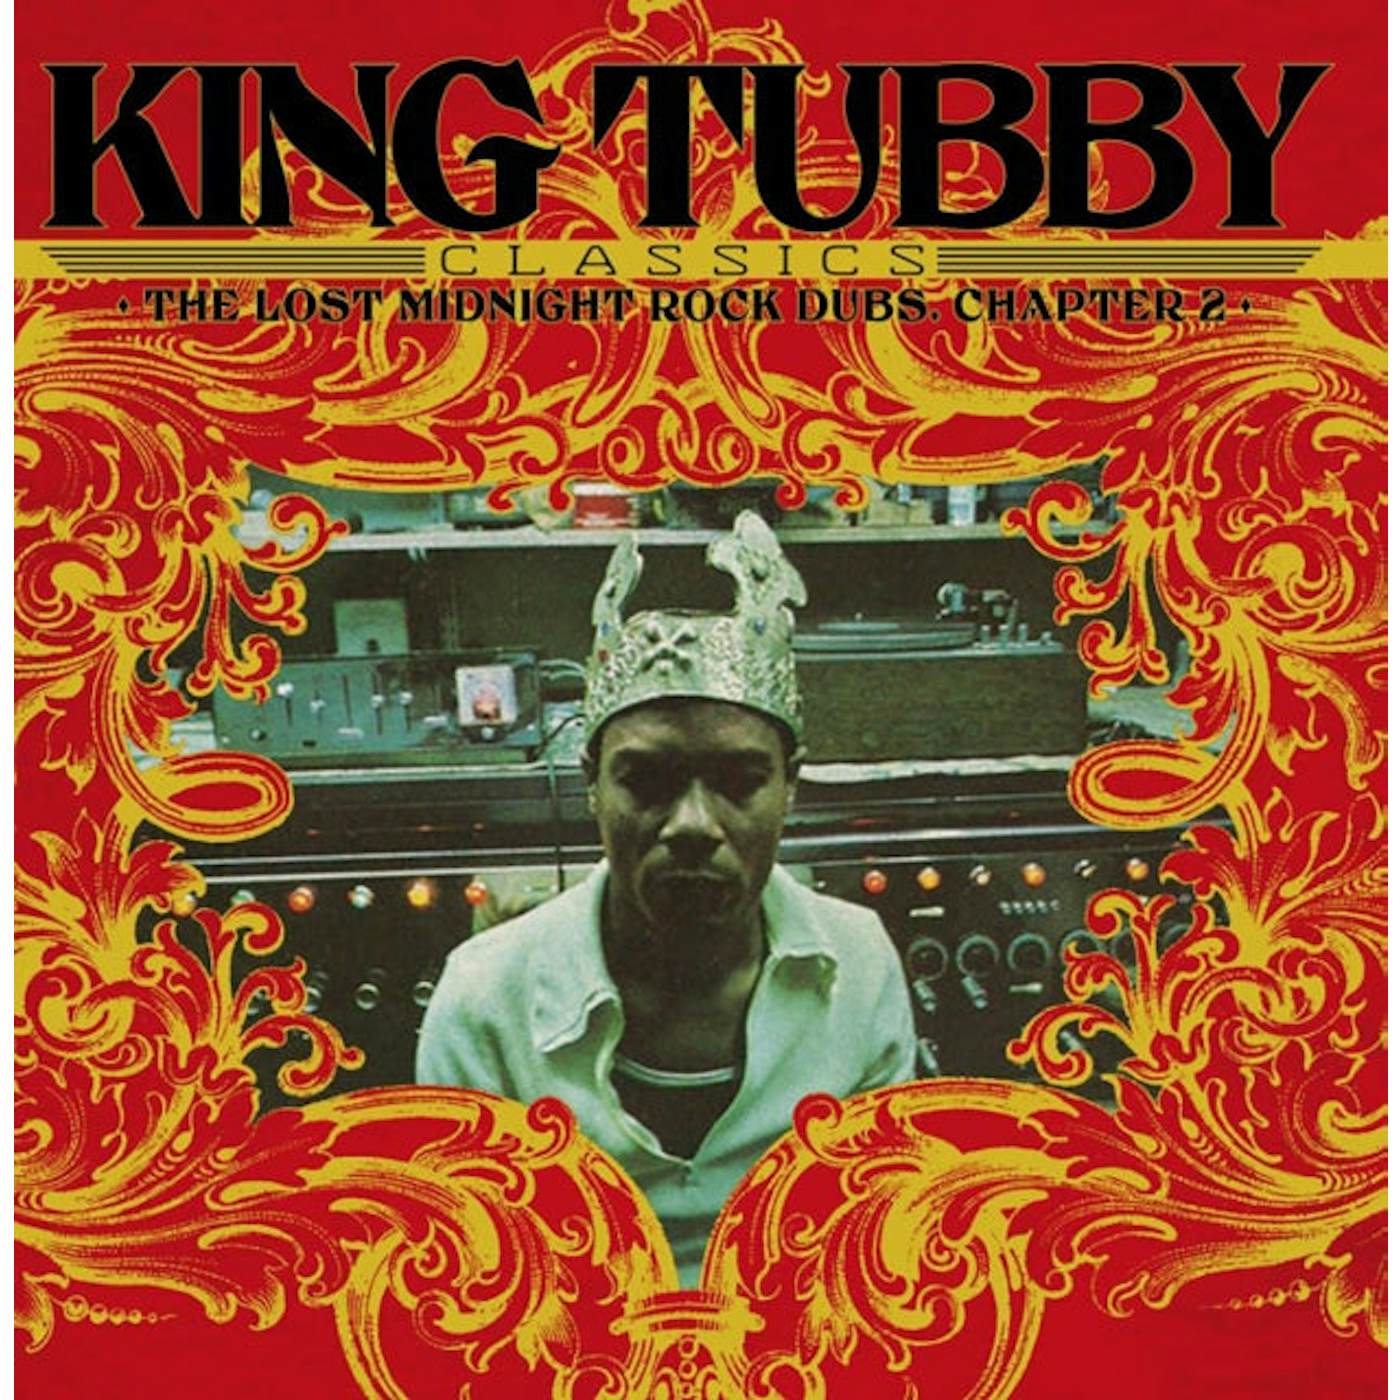 King Tubby LP Vinyl Record - King Tubby's Classics: The Lost Midnight Rock Dubs Chapter 2